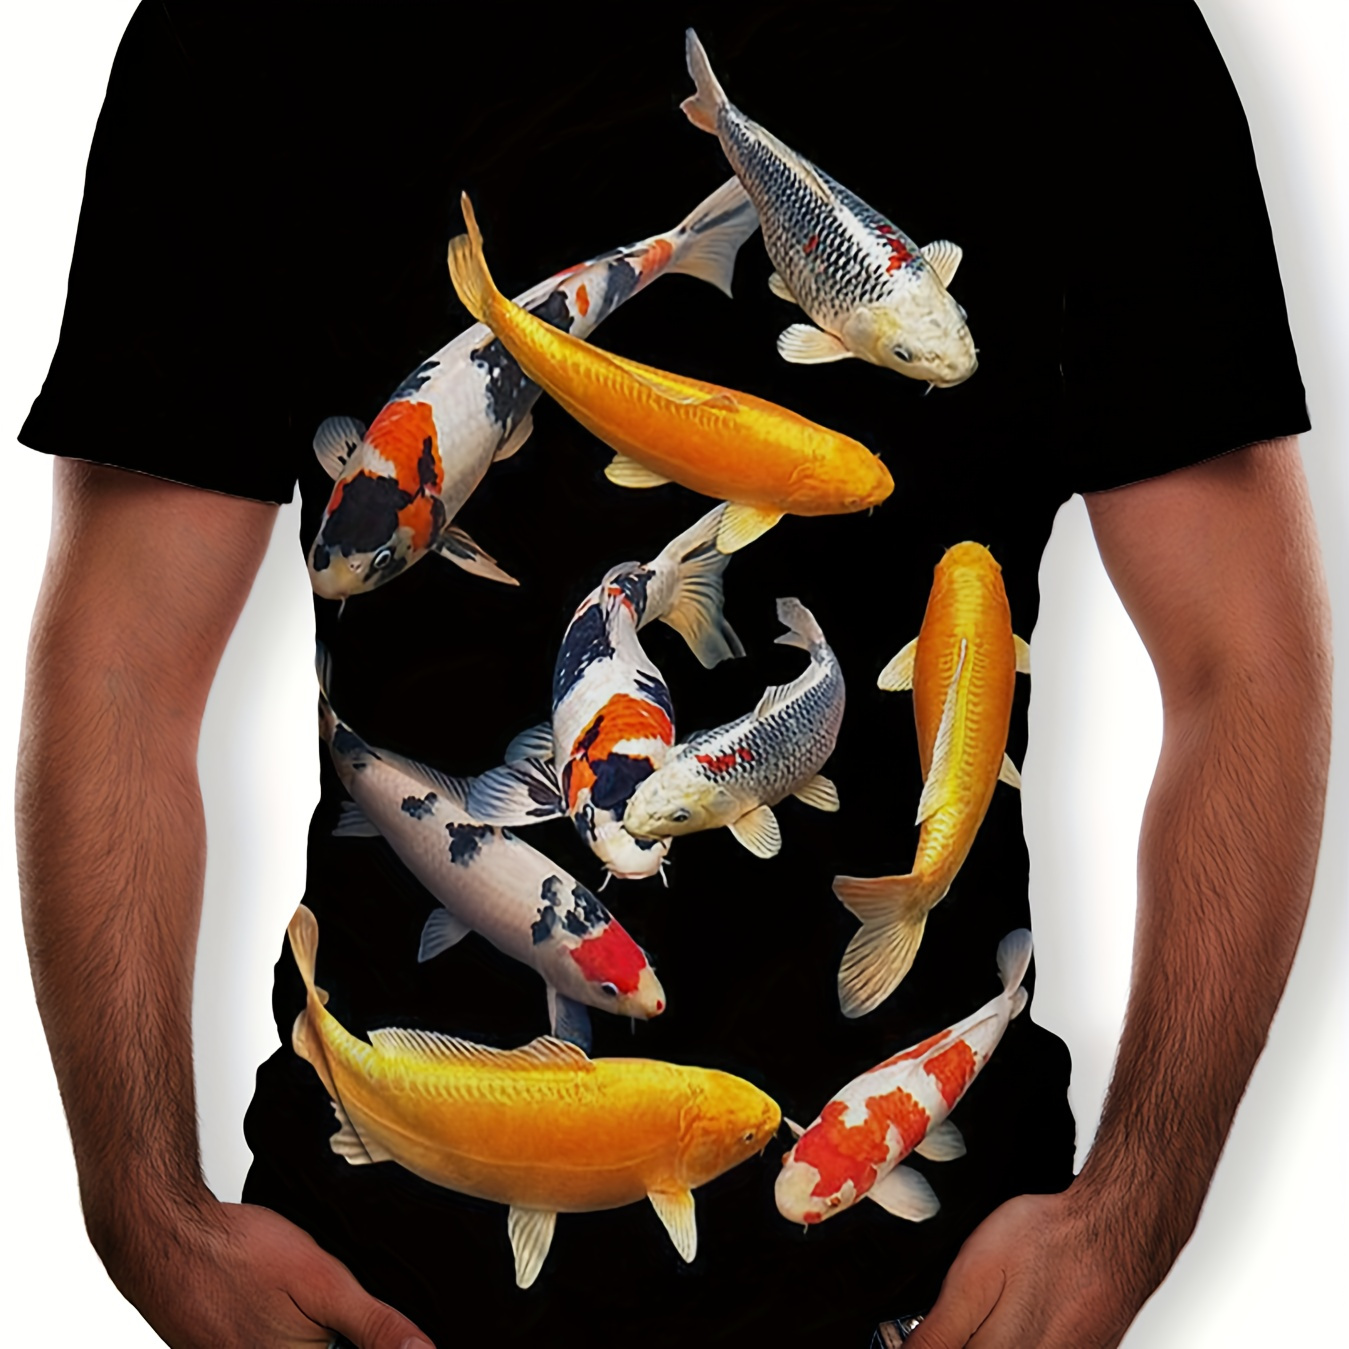 

Men's 3d Digital Koi Fish Pattern Crew Neck Short Sleeve T-shirt, Tees For Men, Casual And Trendy Tops For Summer Outdoors Wear